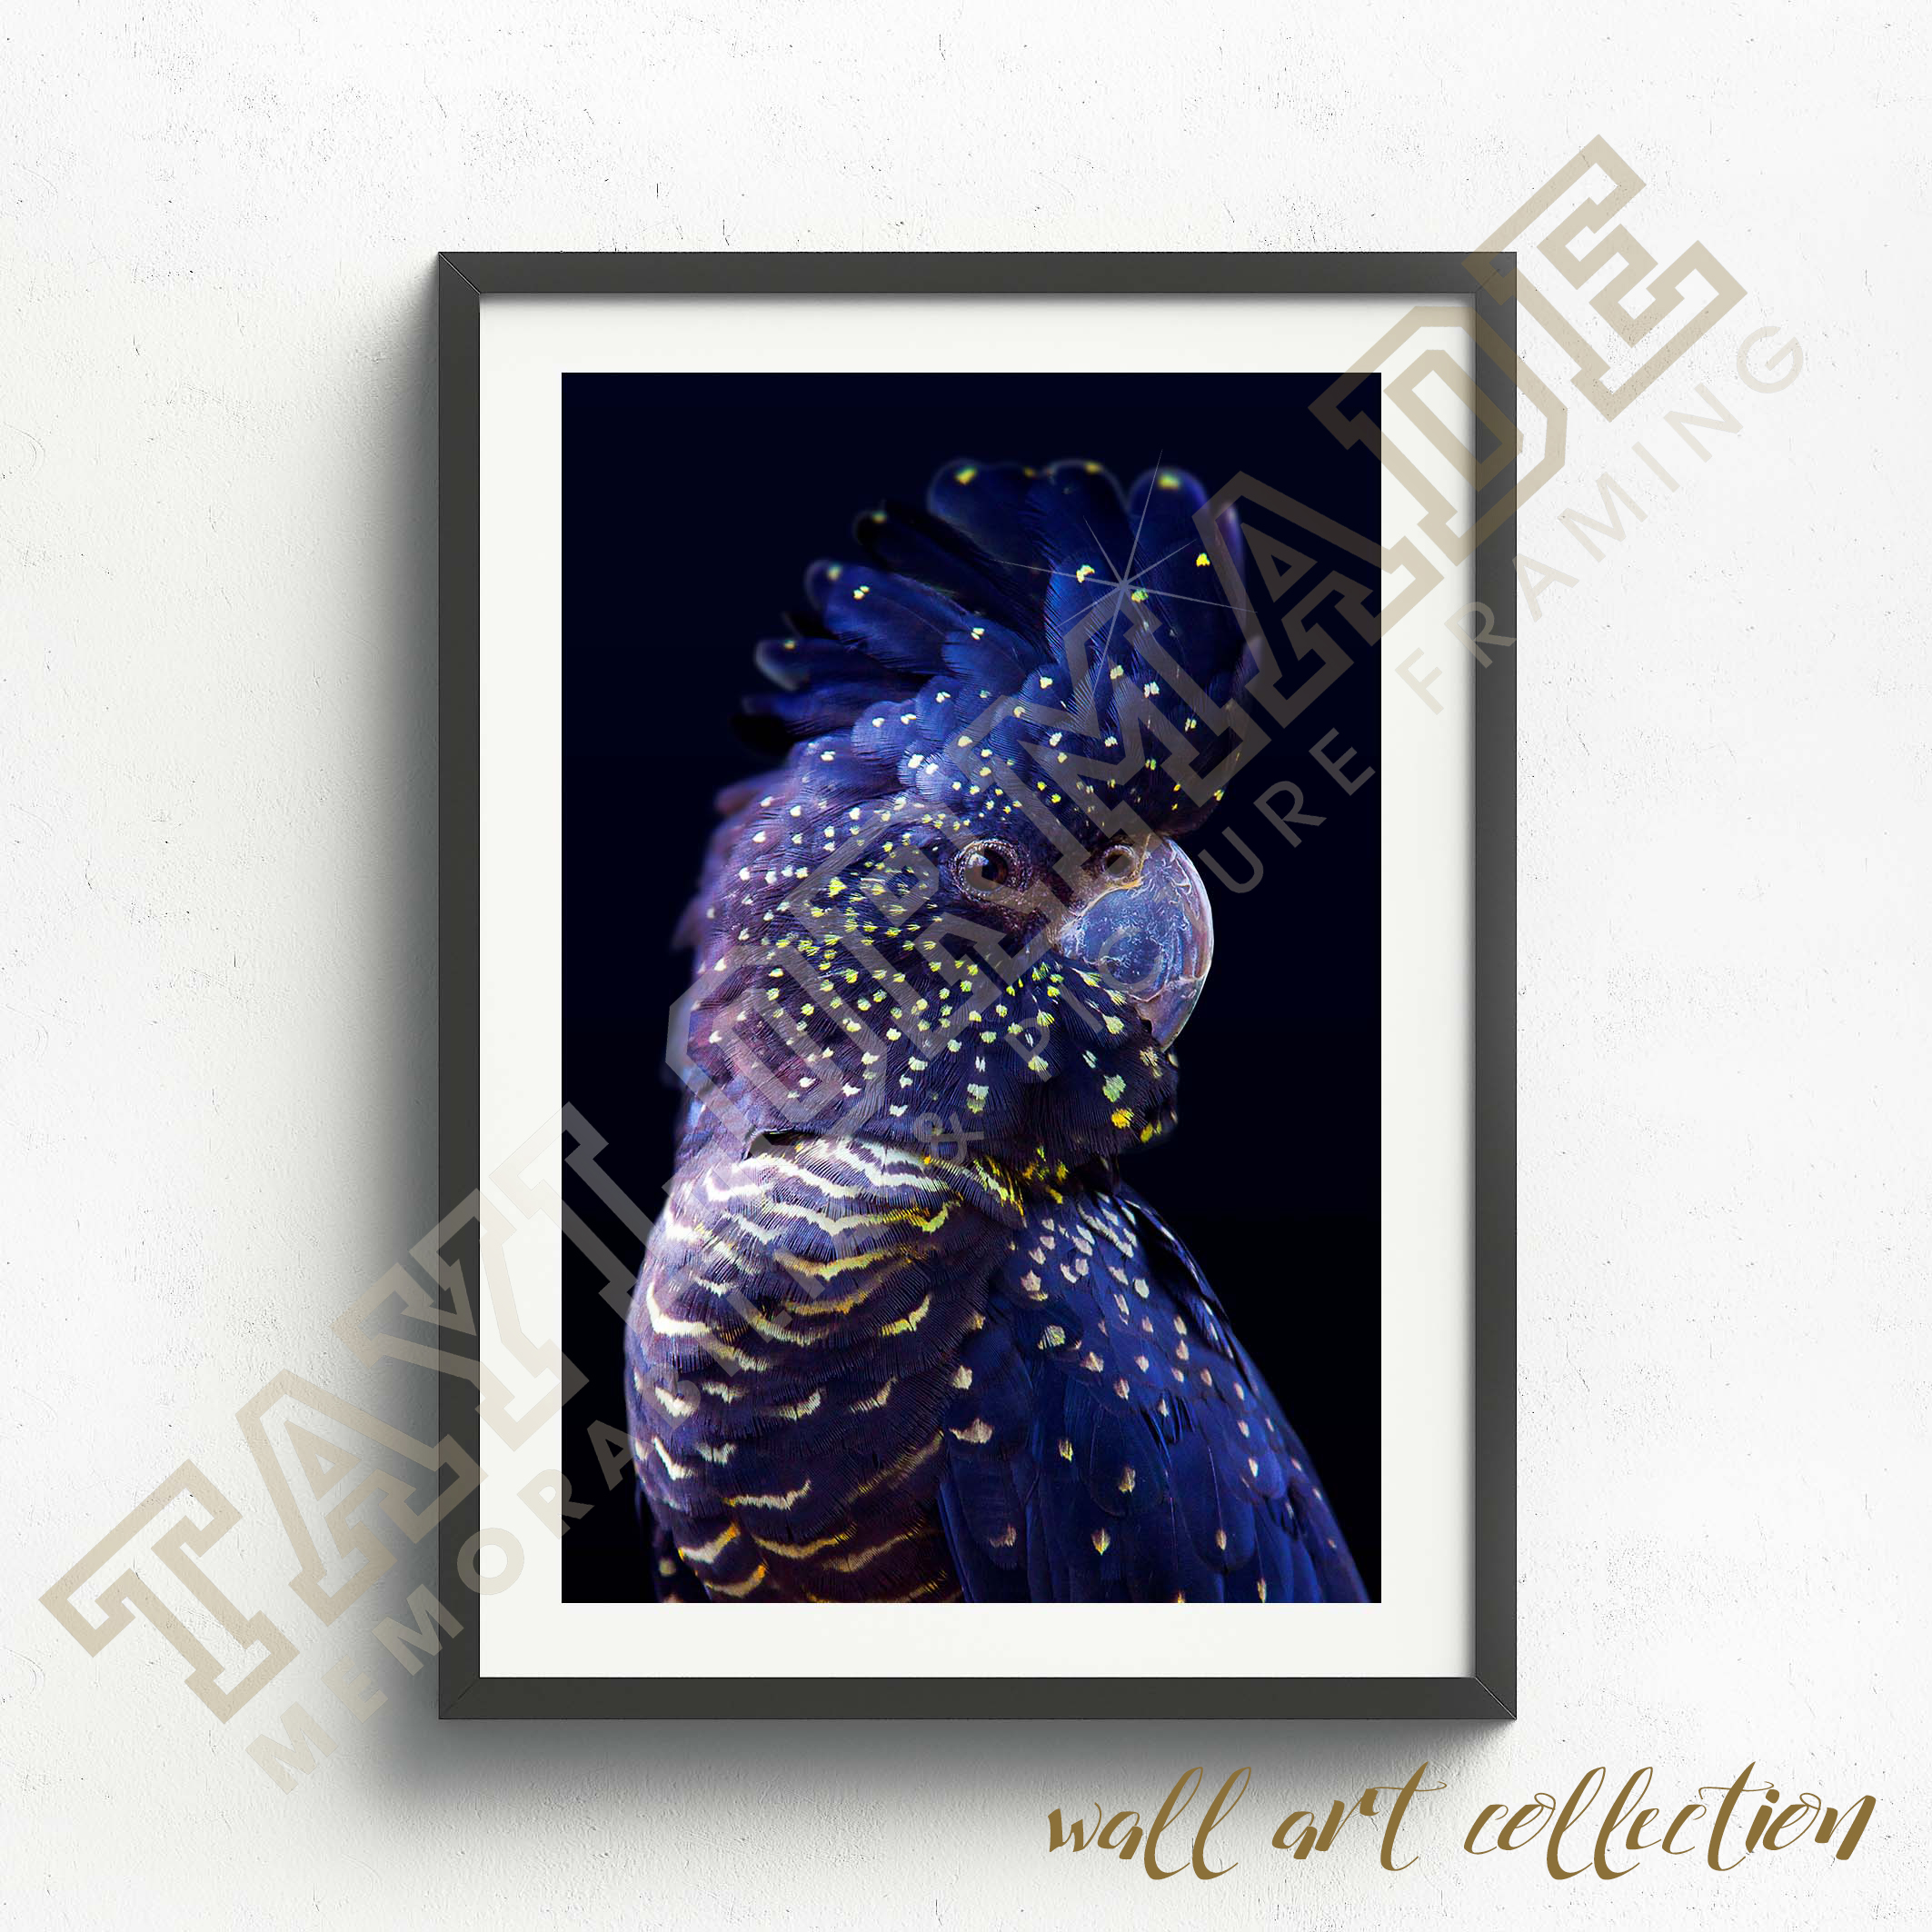 Wall Art Collection – Starry Eyed Cockatoo